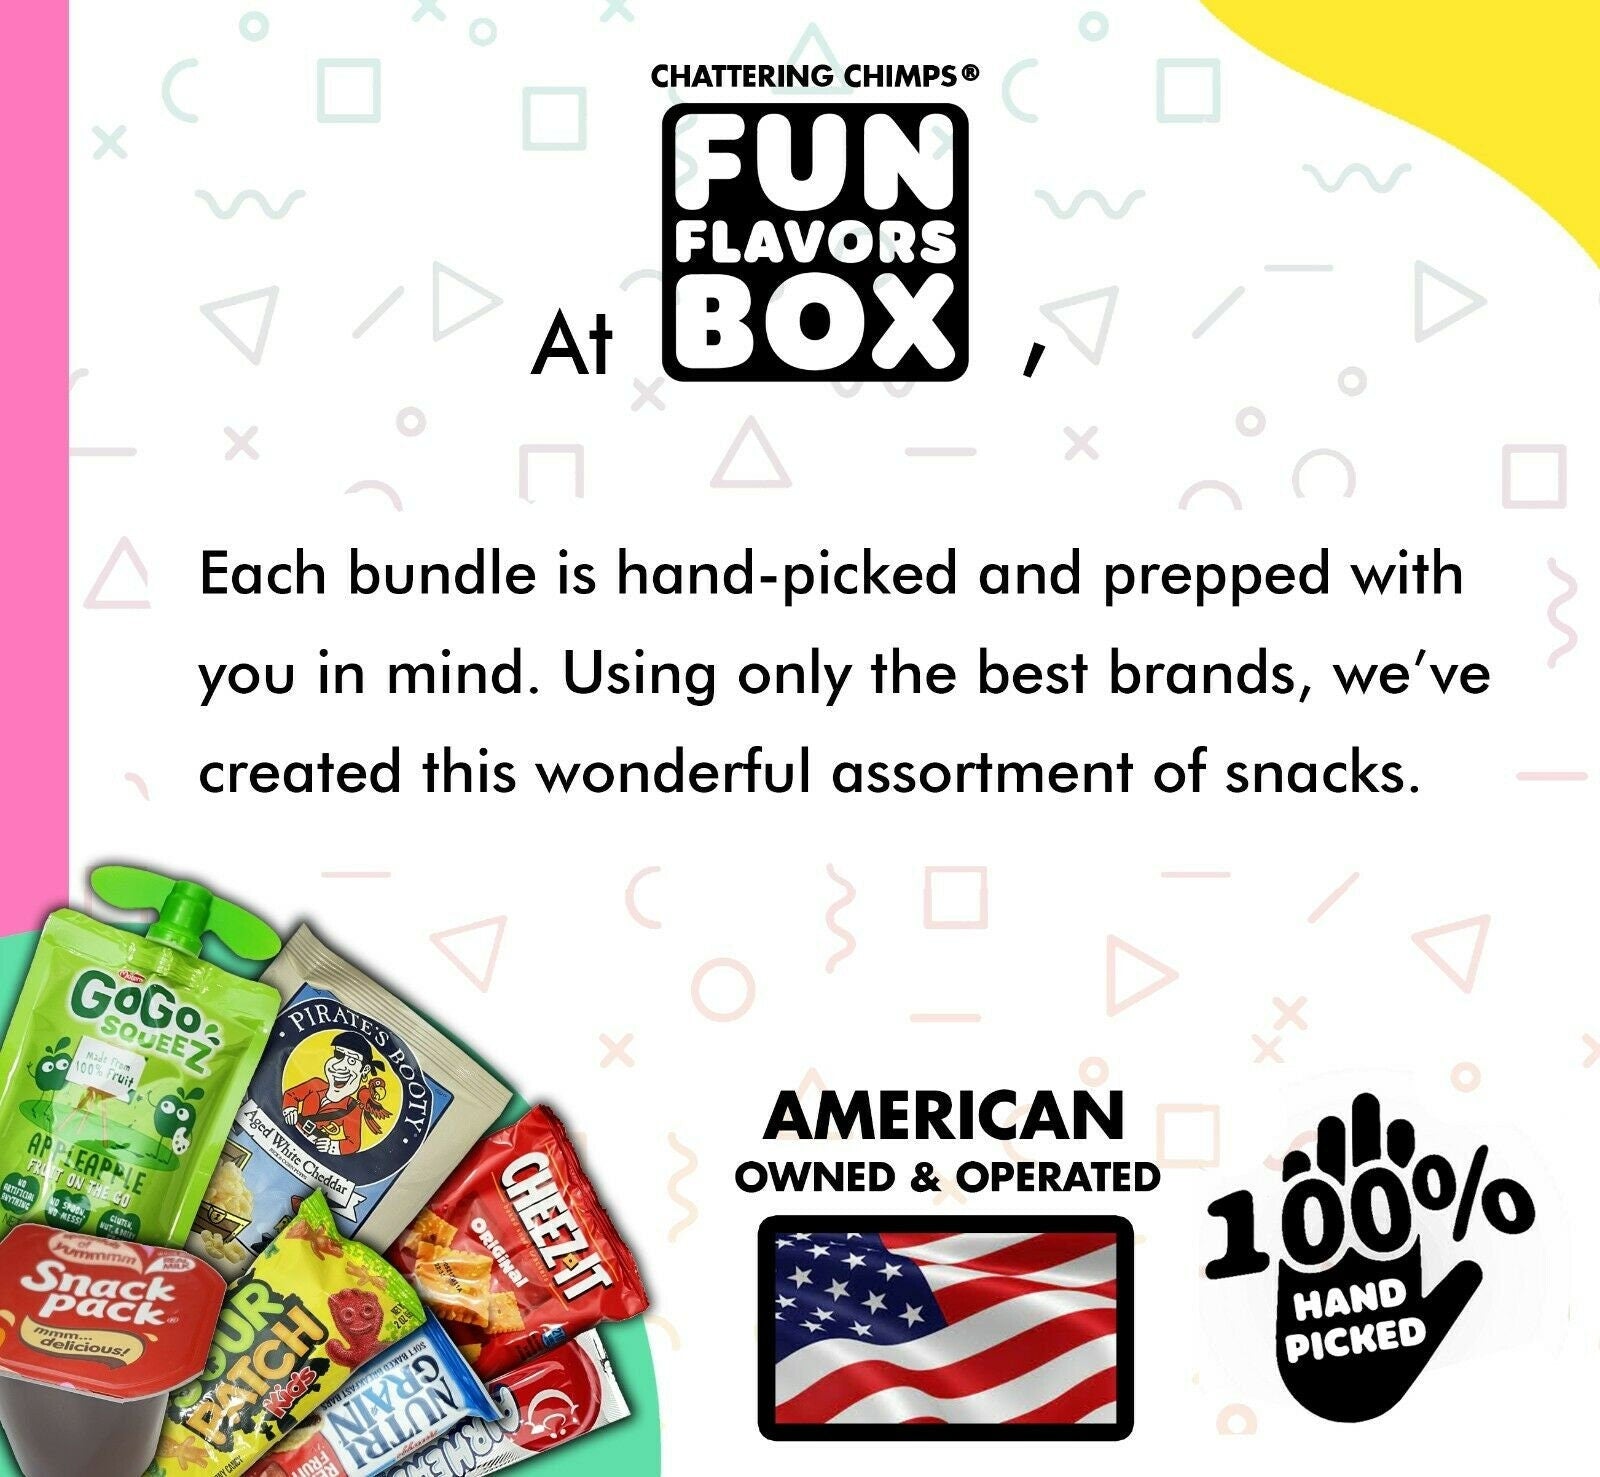 At Fun Flavors Box each bundle is hand picked and prepped.  We use only the best brands to create this wonderful snack assortment.  American owned and operated.